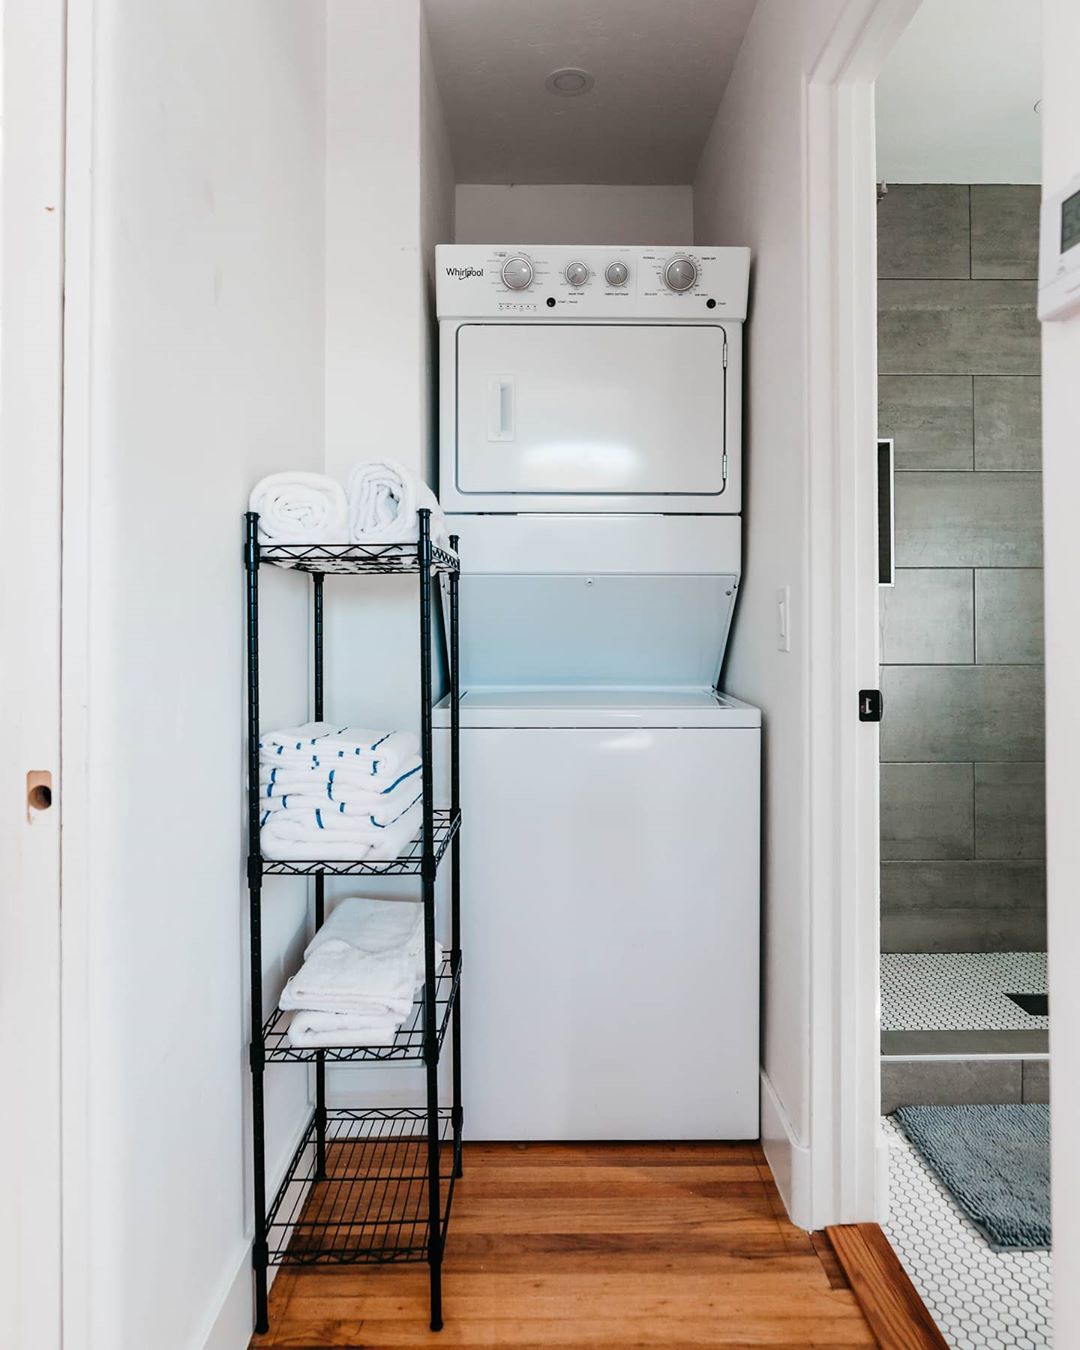 Stacked Washer and Dryer Next to Bathroom. Photo by Instagram user @thehillcresthavenairbnb